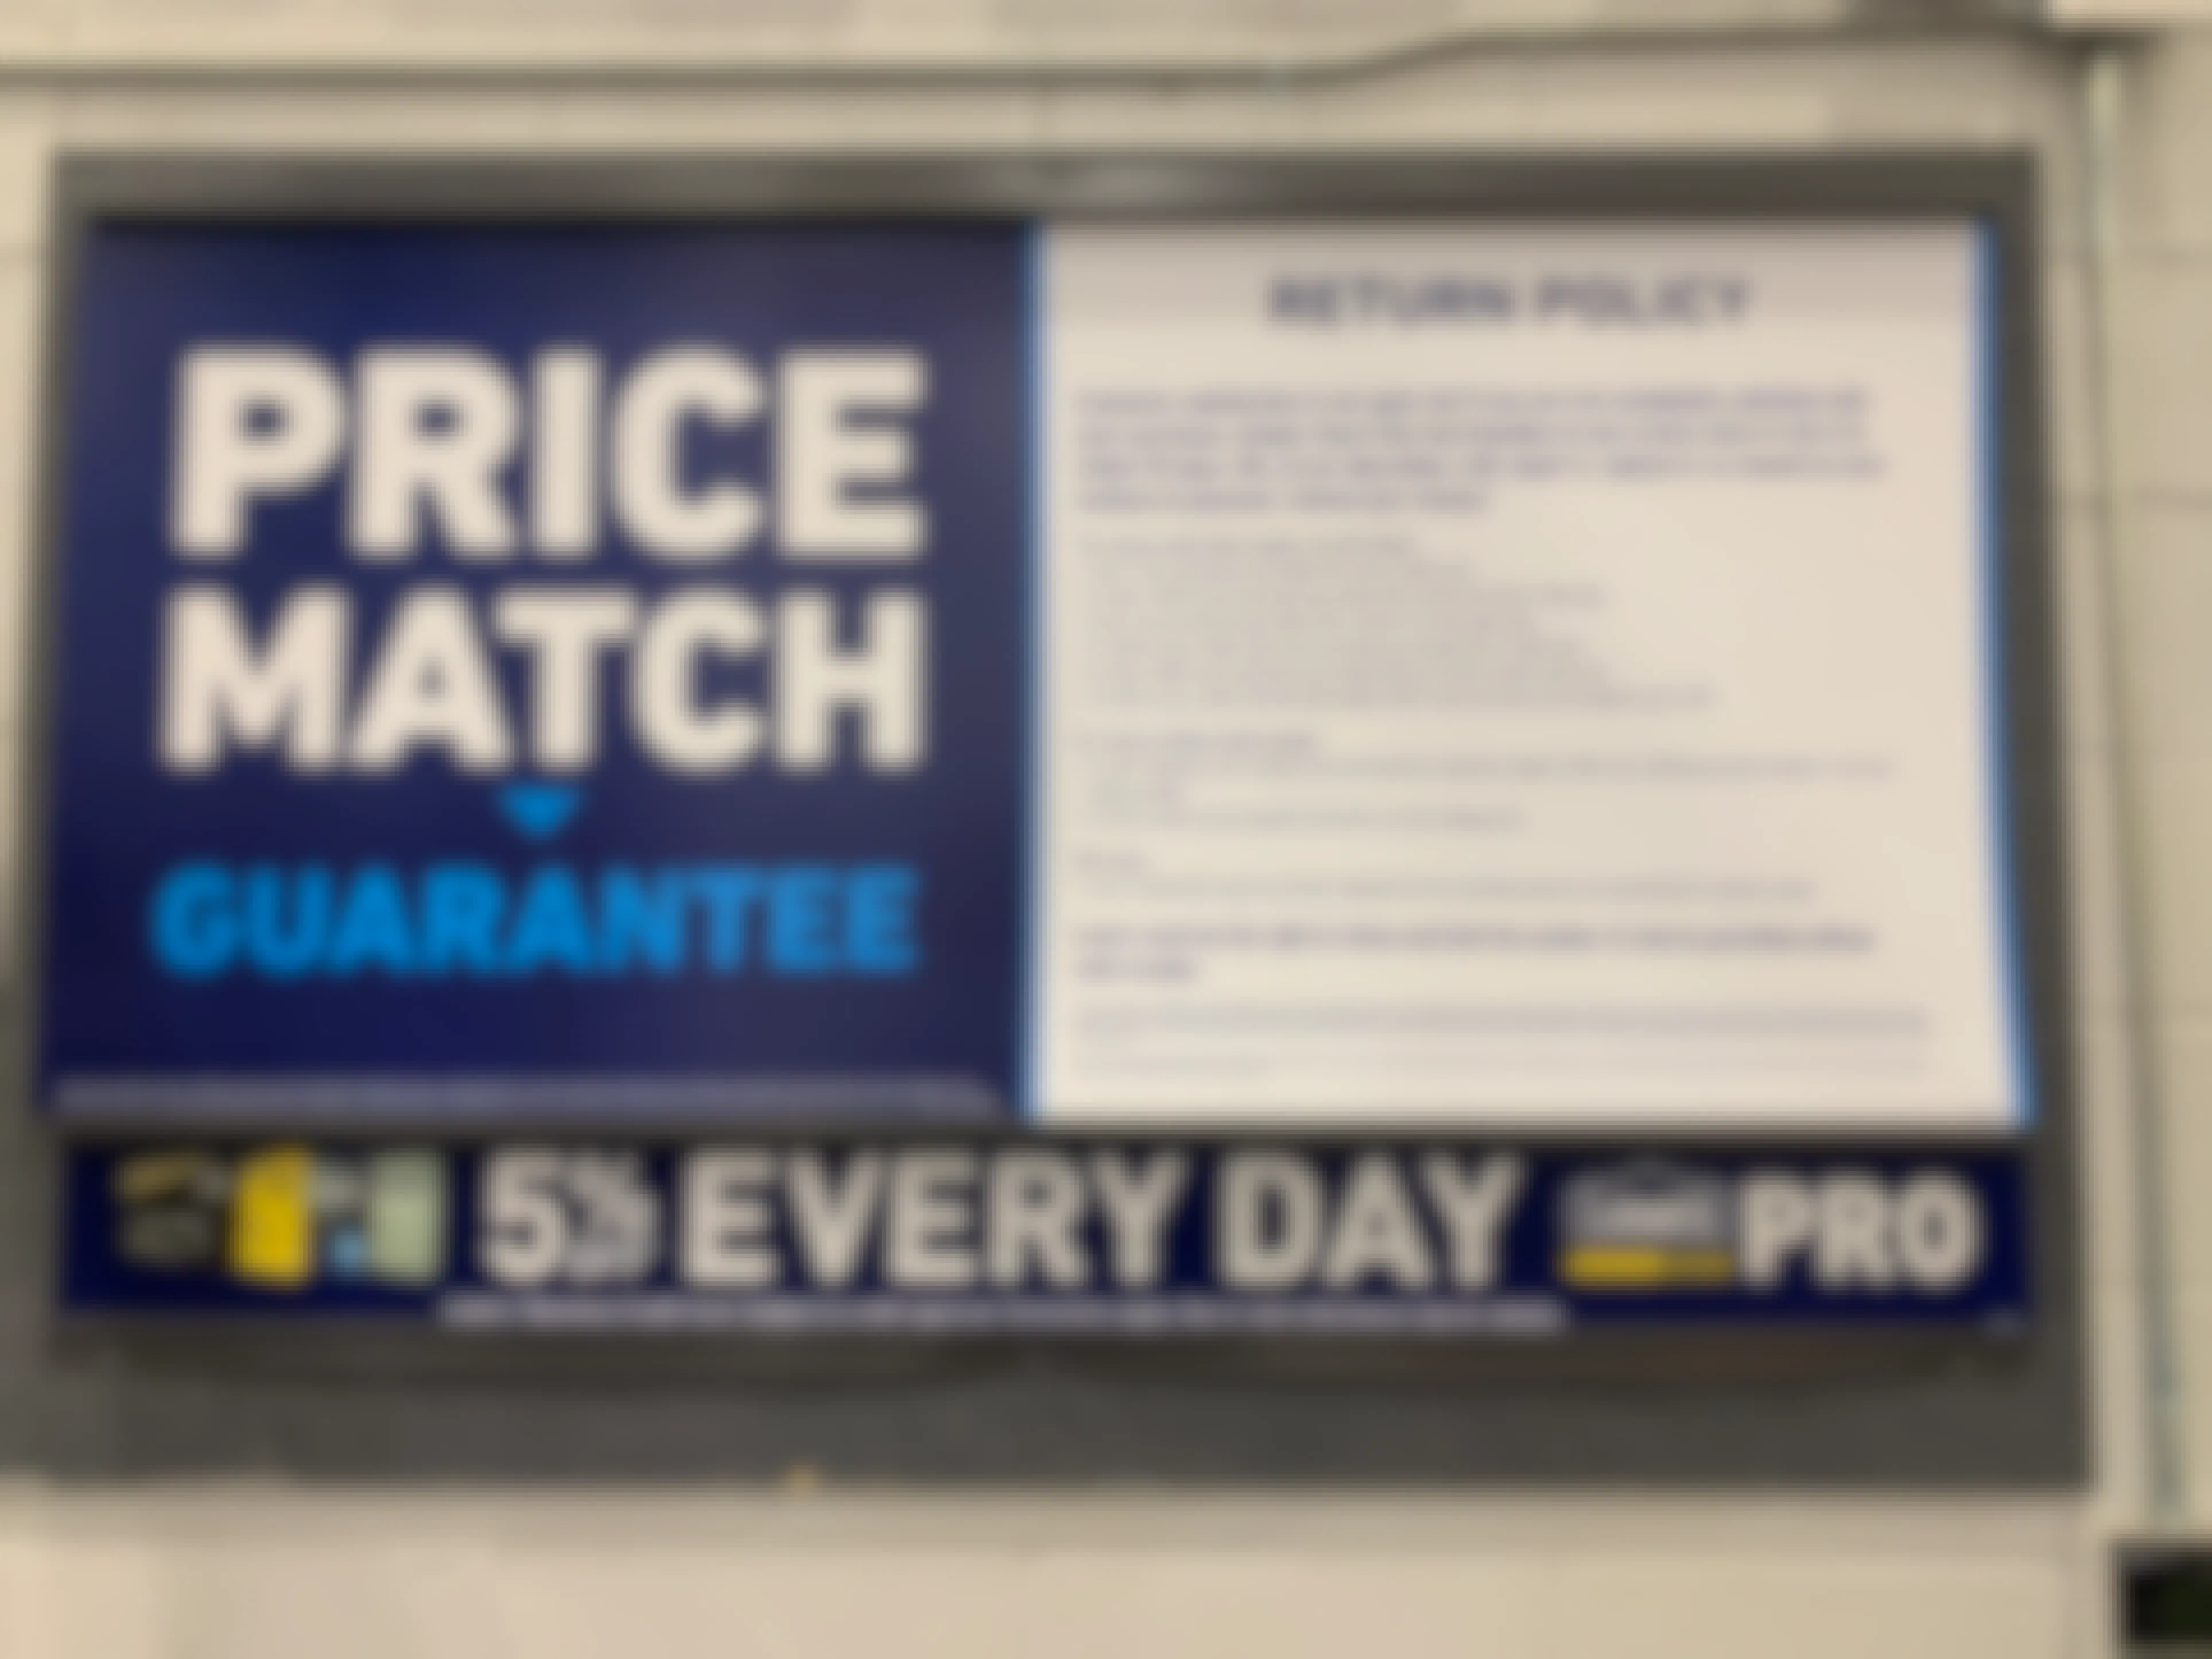 Sign of price match guarantee and return policy